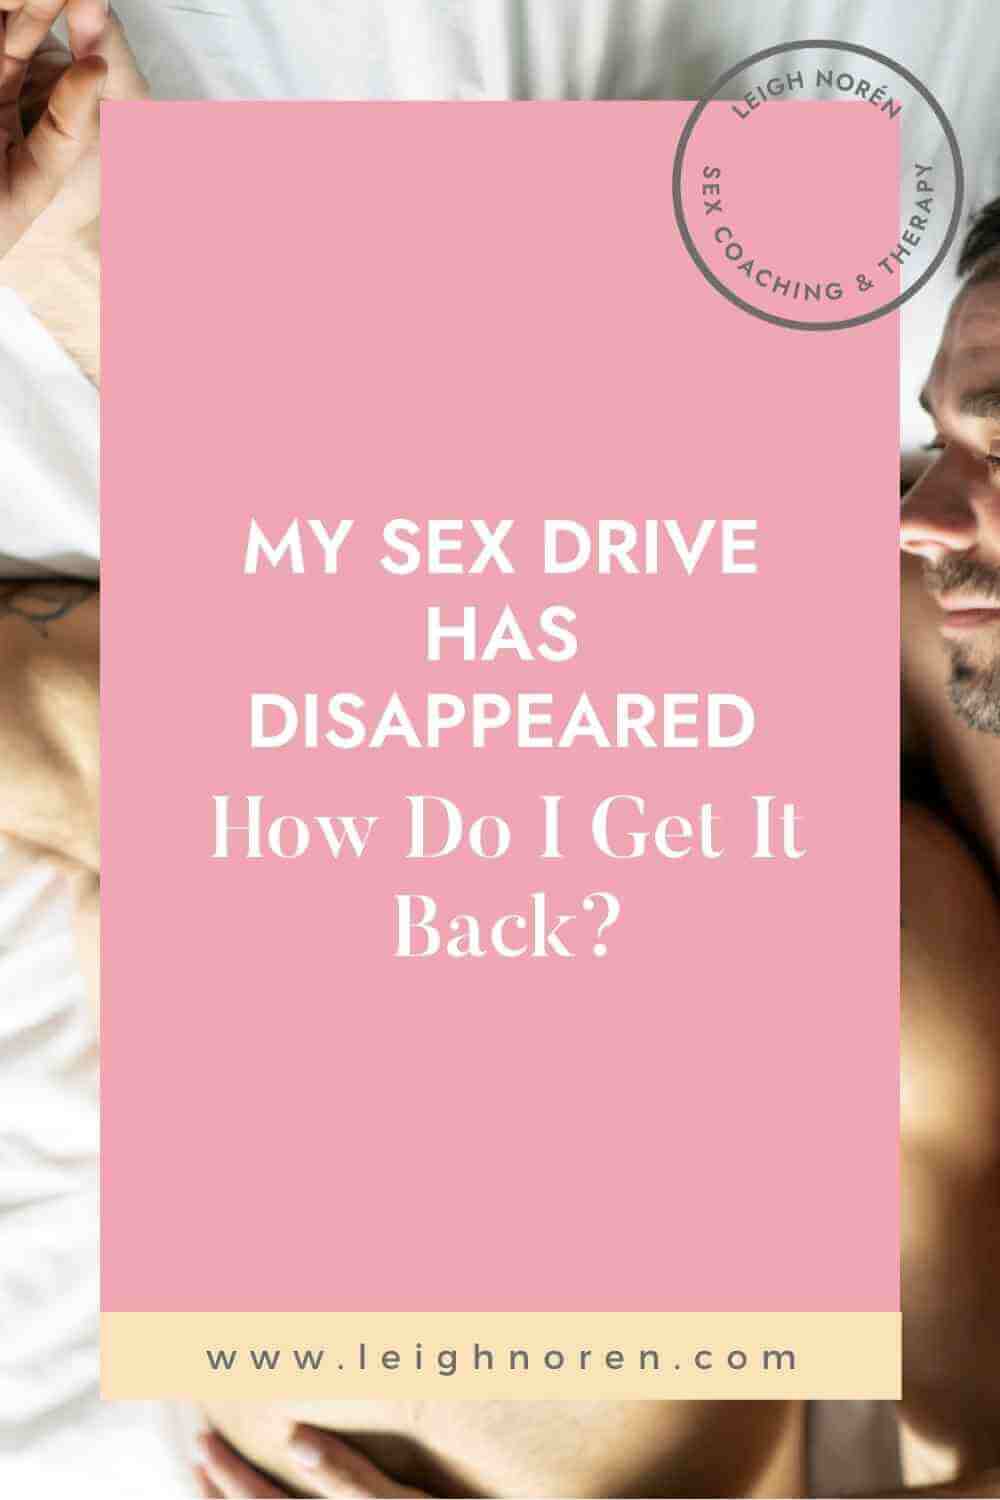 My Sex Drive Has Disappeared - How Can I Get It Back?